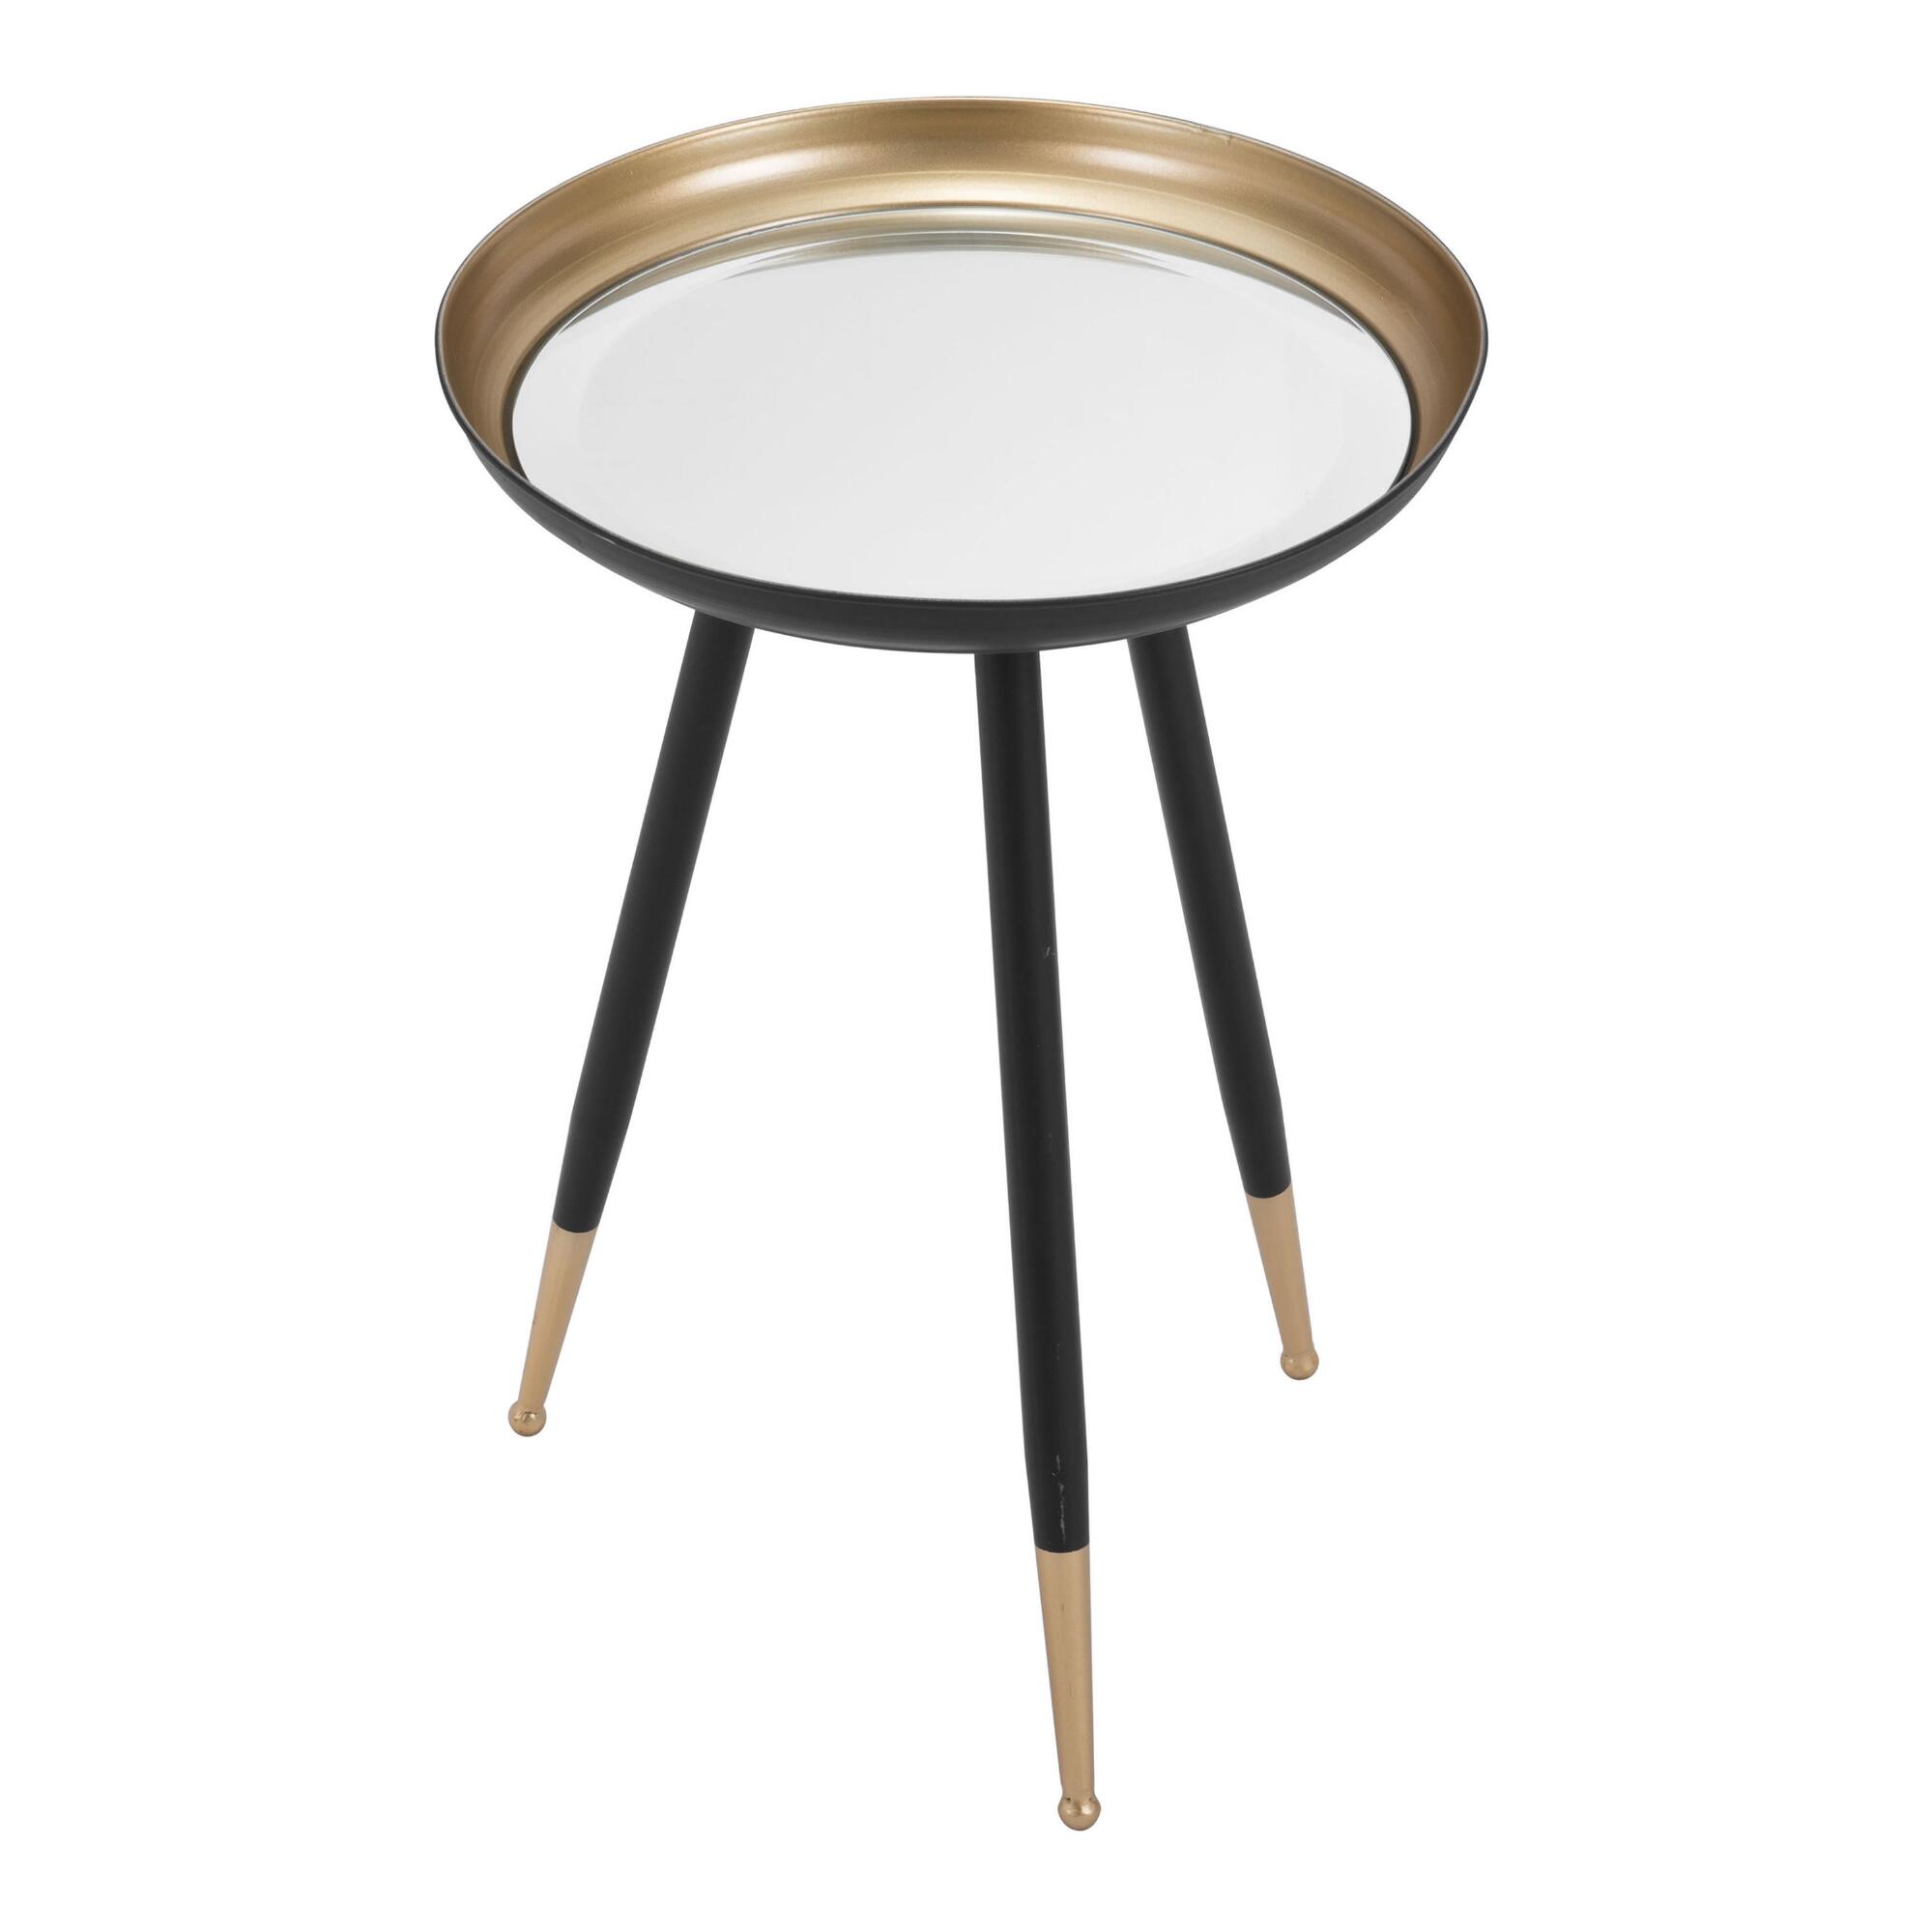 Round Black and Gold Mirrored Grand Accent Table: Black/Gold by World Market